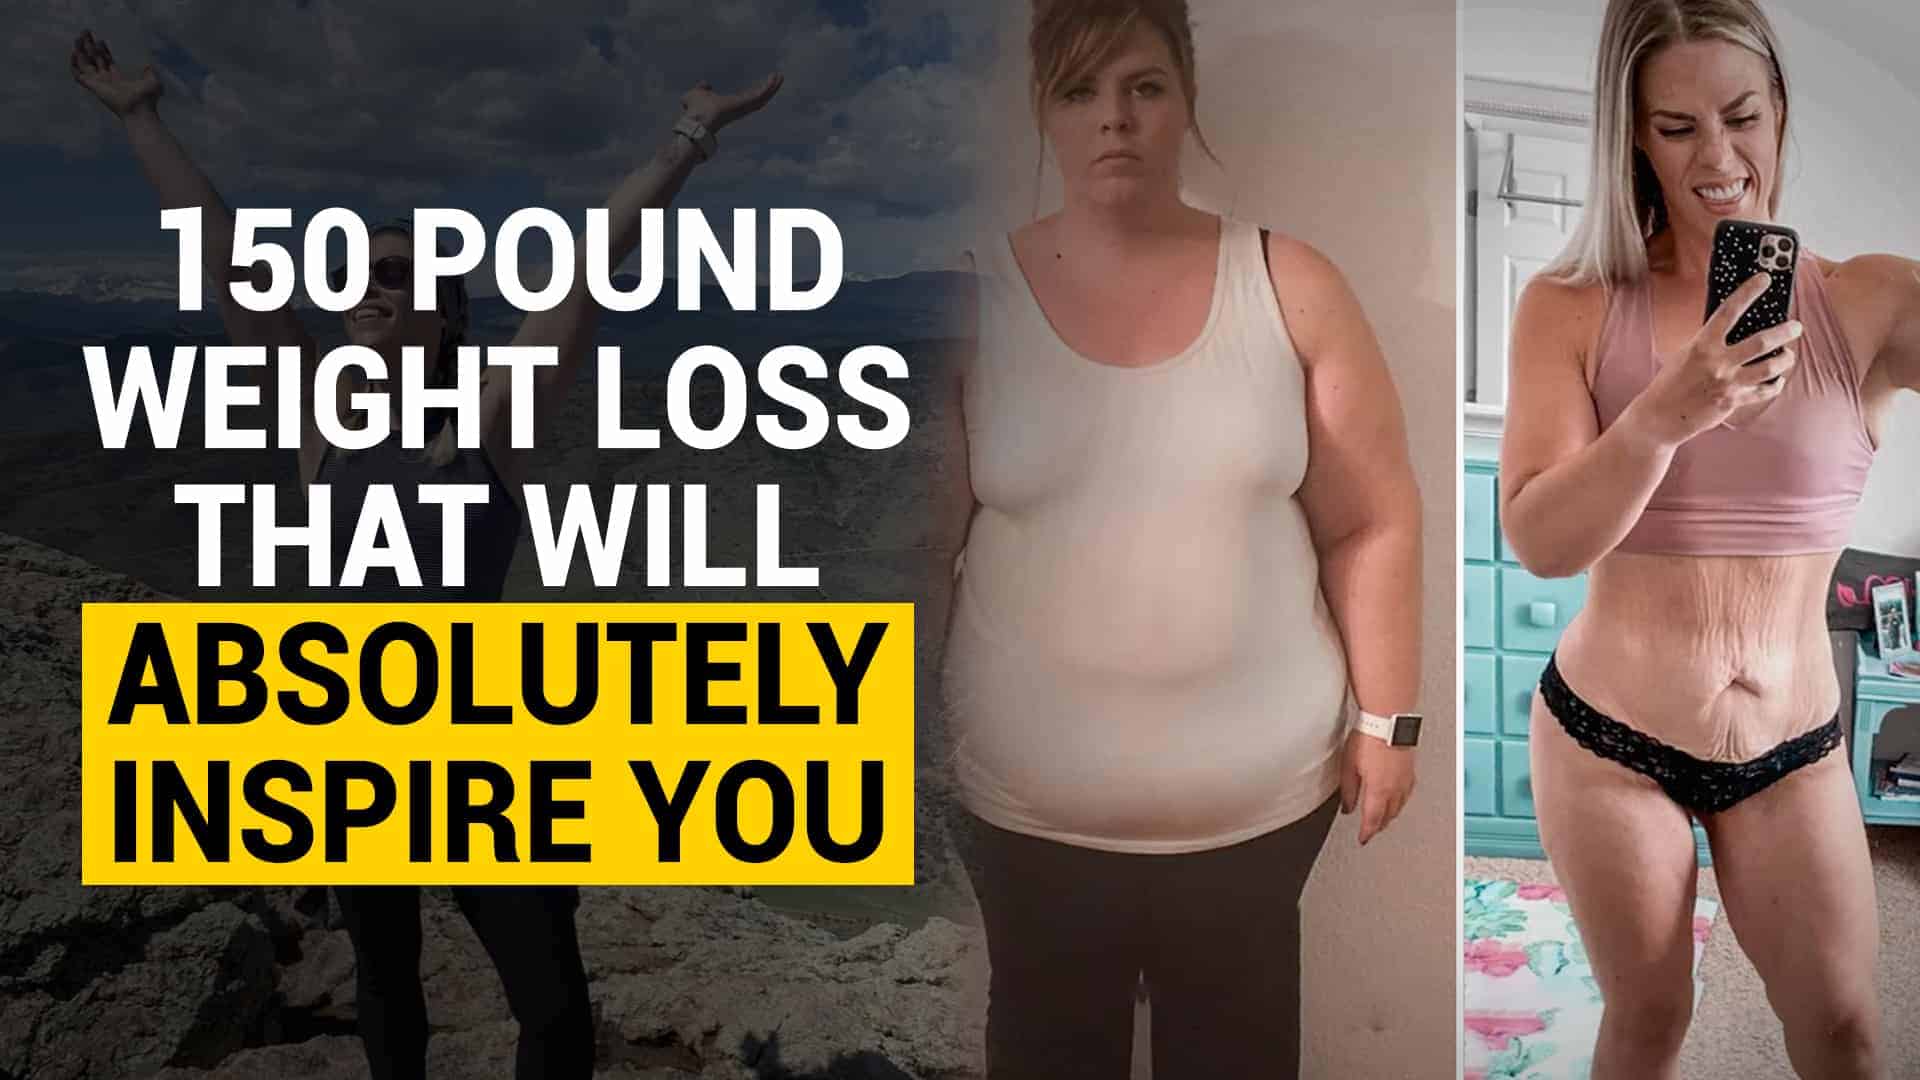 Woman’s 150 Pound Weight Loss Is an Amazing Transformation